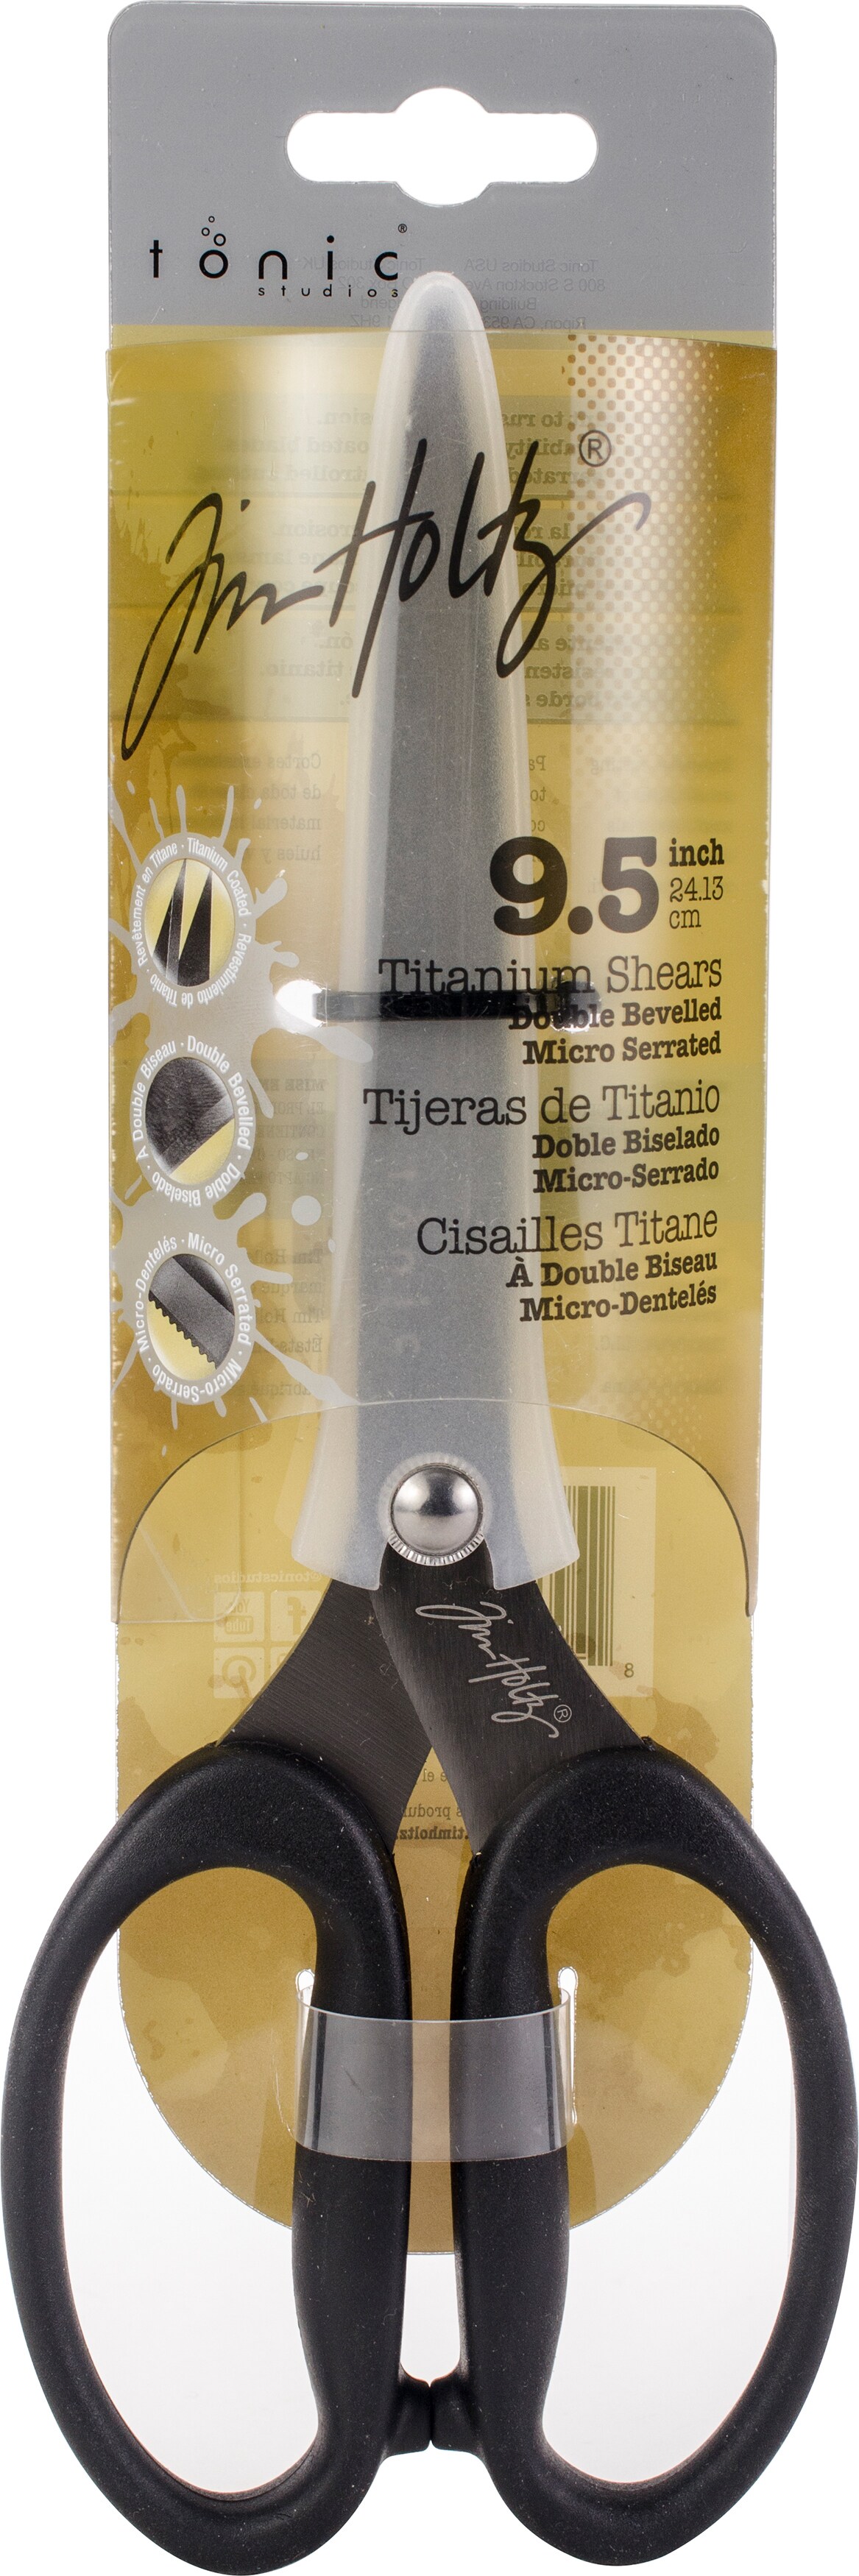 Tim Holtz Scissors All Purpose - 9.5 Inch Titanium Snips with Micro  Serrated Blade Edge - Non Stick Craft Tool for Cutting Paper, Fabric, and  Sewing - Comfort Grip Handles